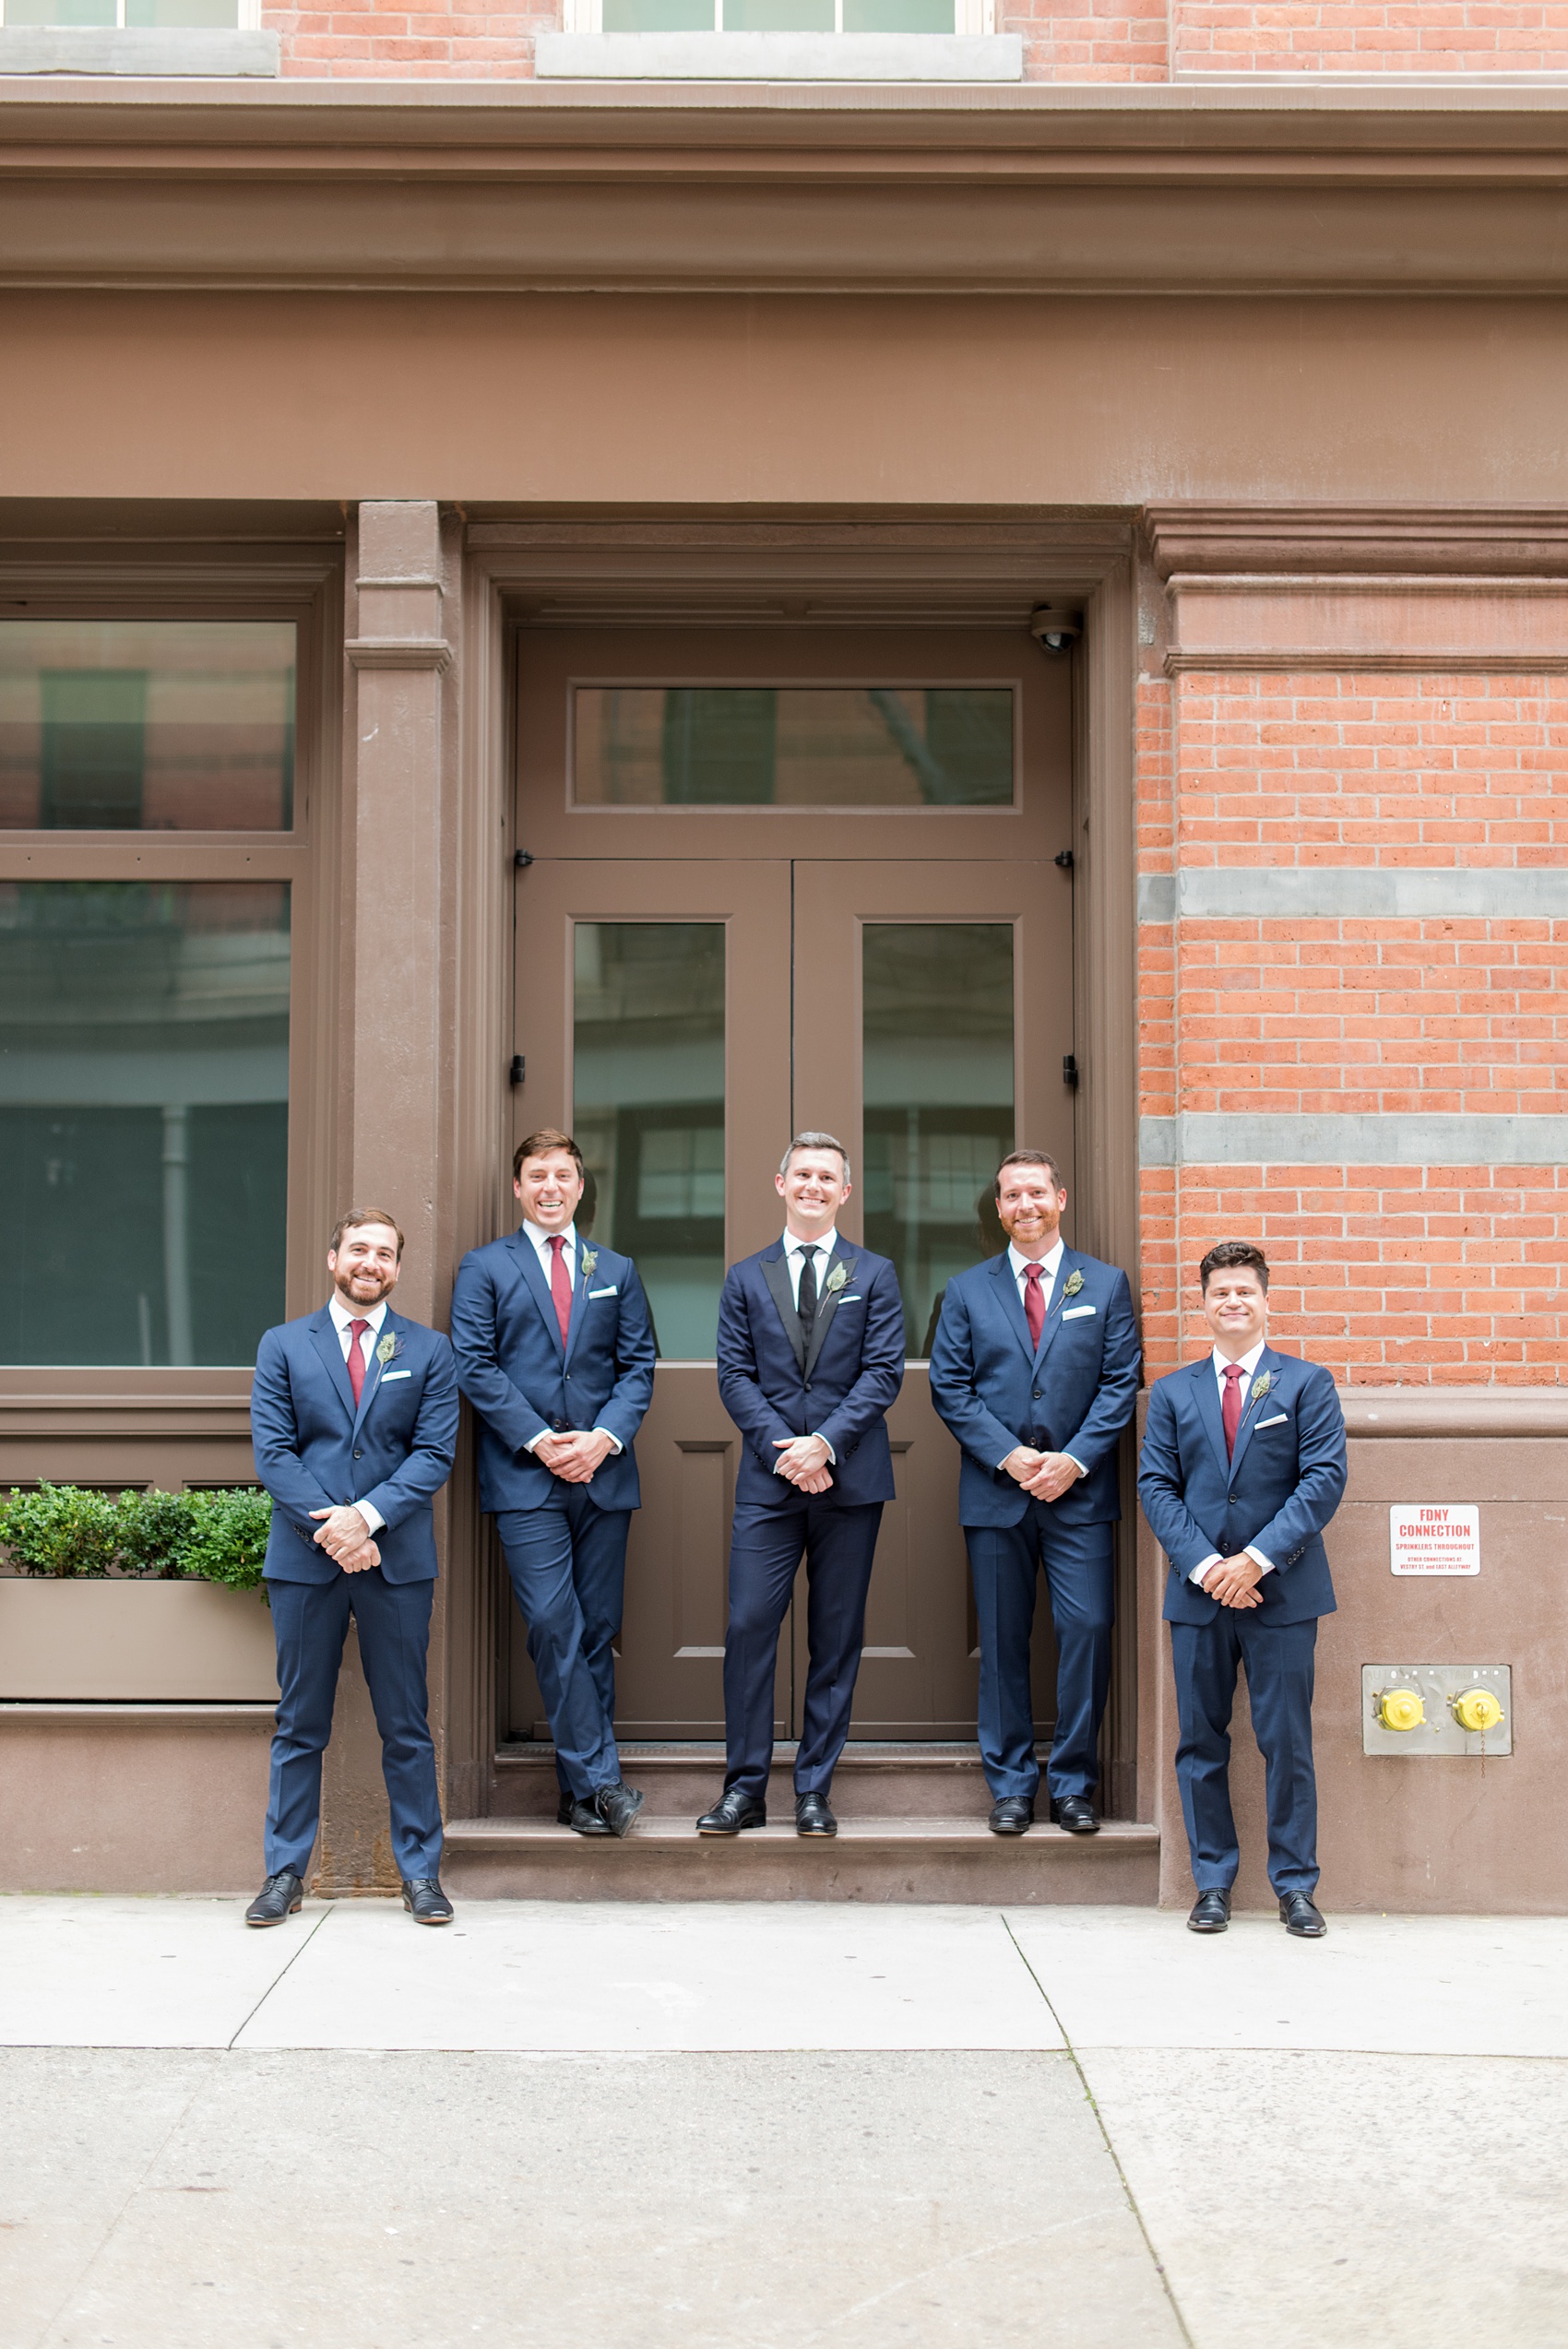 Wedding photos at Tribeca Rooftop by Mikkel Paige Photography, in NYC. This Manhattan venue has the perfect view of the New York City skyline including Freedom Tower. The groomsmen posed for a photo in the city. #ManhattanWedding #TribecaRooftop #TribecaRooftopWeddingPhotos #SeptemberWedding #Groom #MikkelPaige #WeddingPhotos #Groomsmen #NavyBlueSuits #RedWeddingInspiration